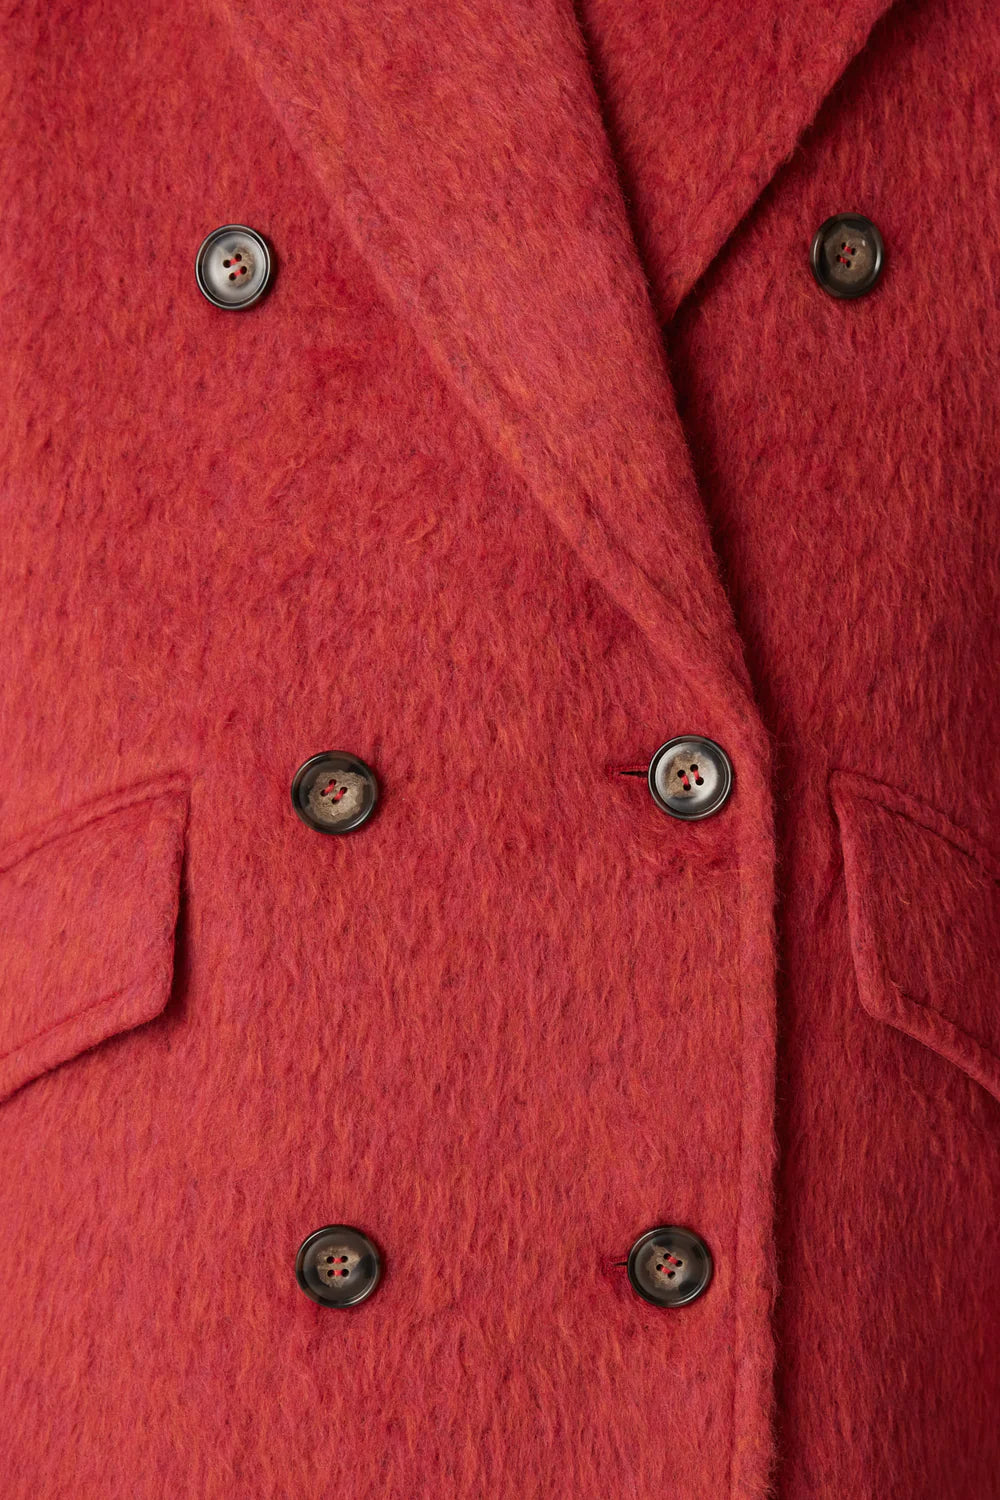 SABINE DOUBLE BREASTED COAT - RED